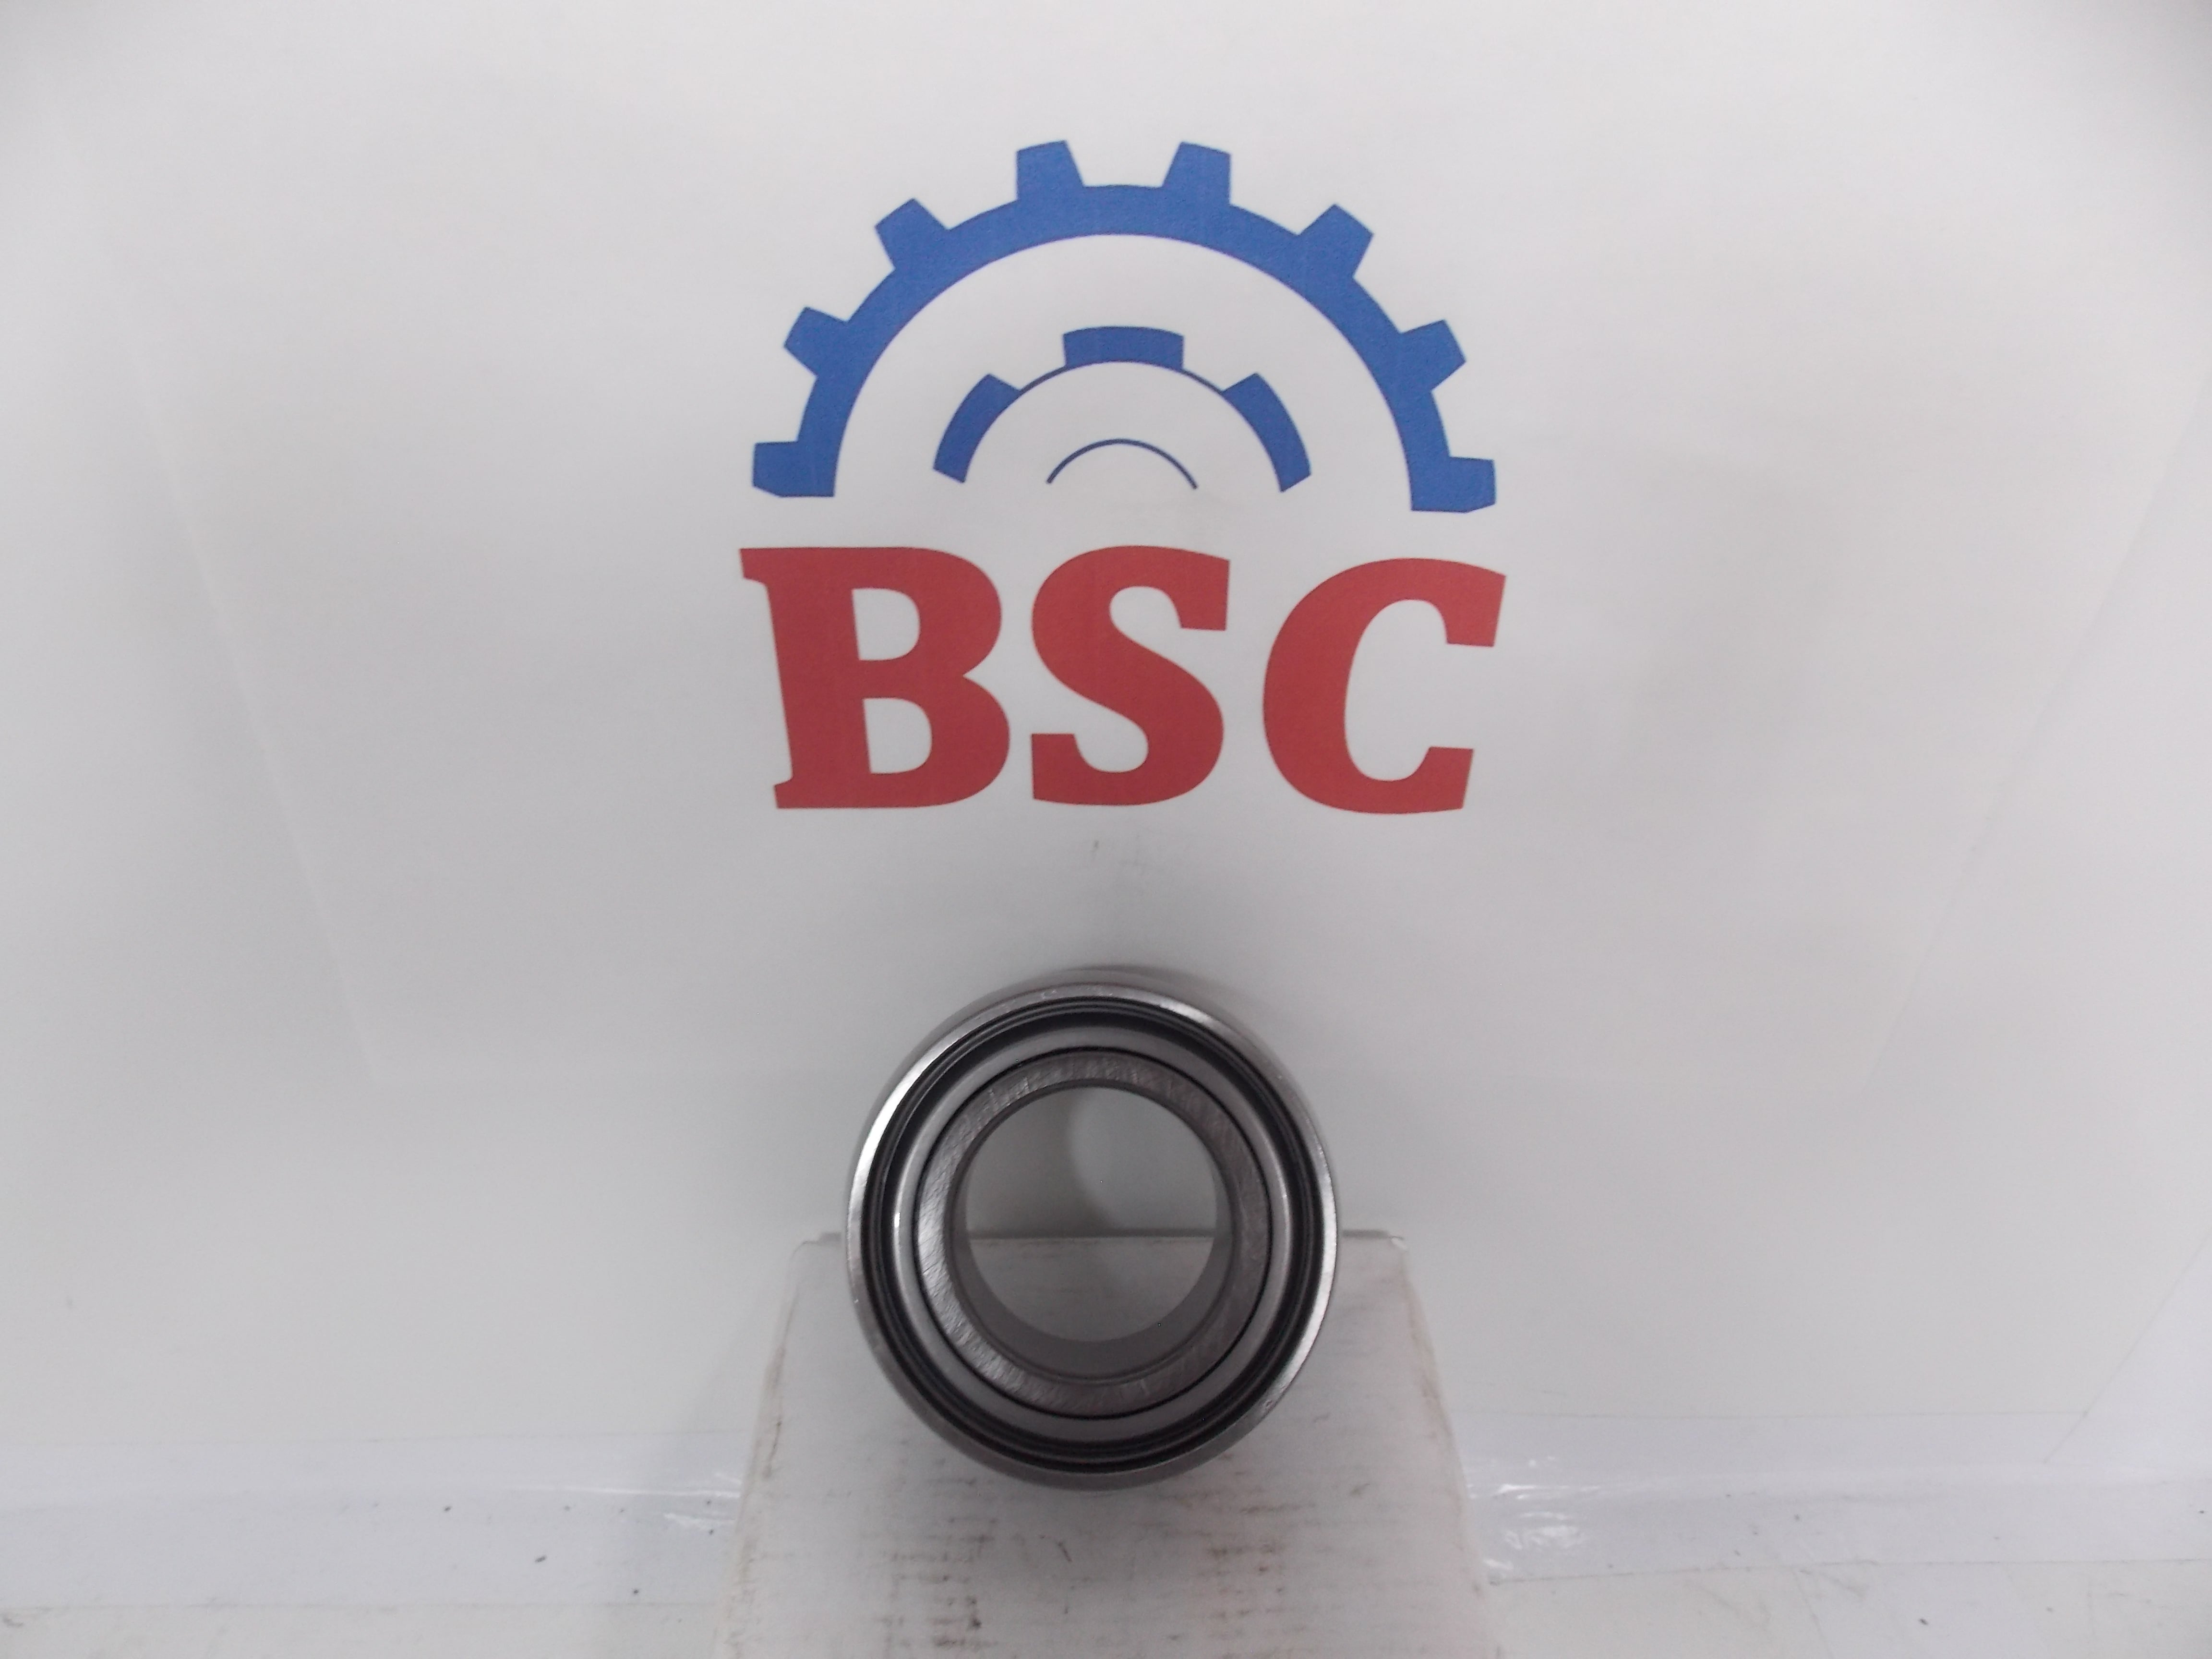 Z9504 Special AG Bearing Round Bore